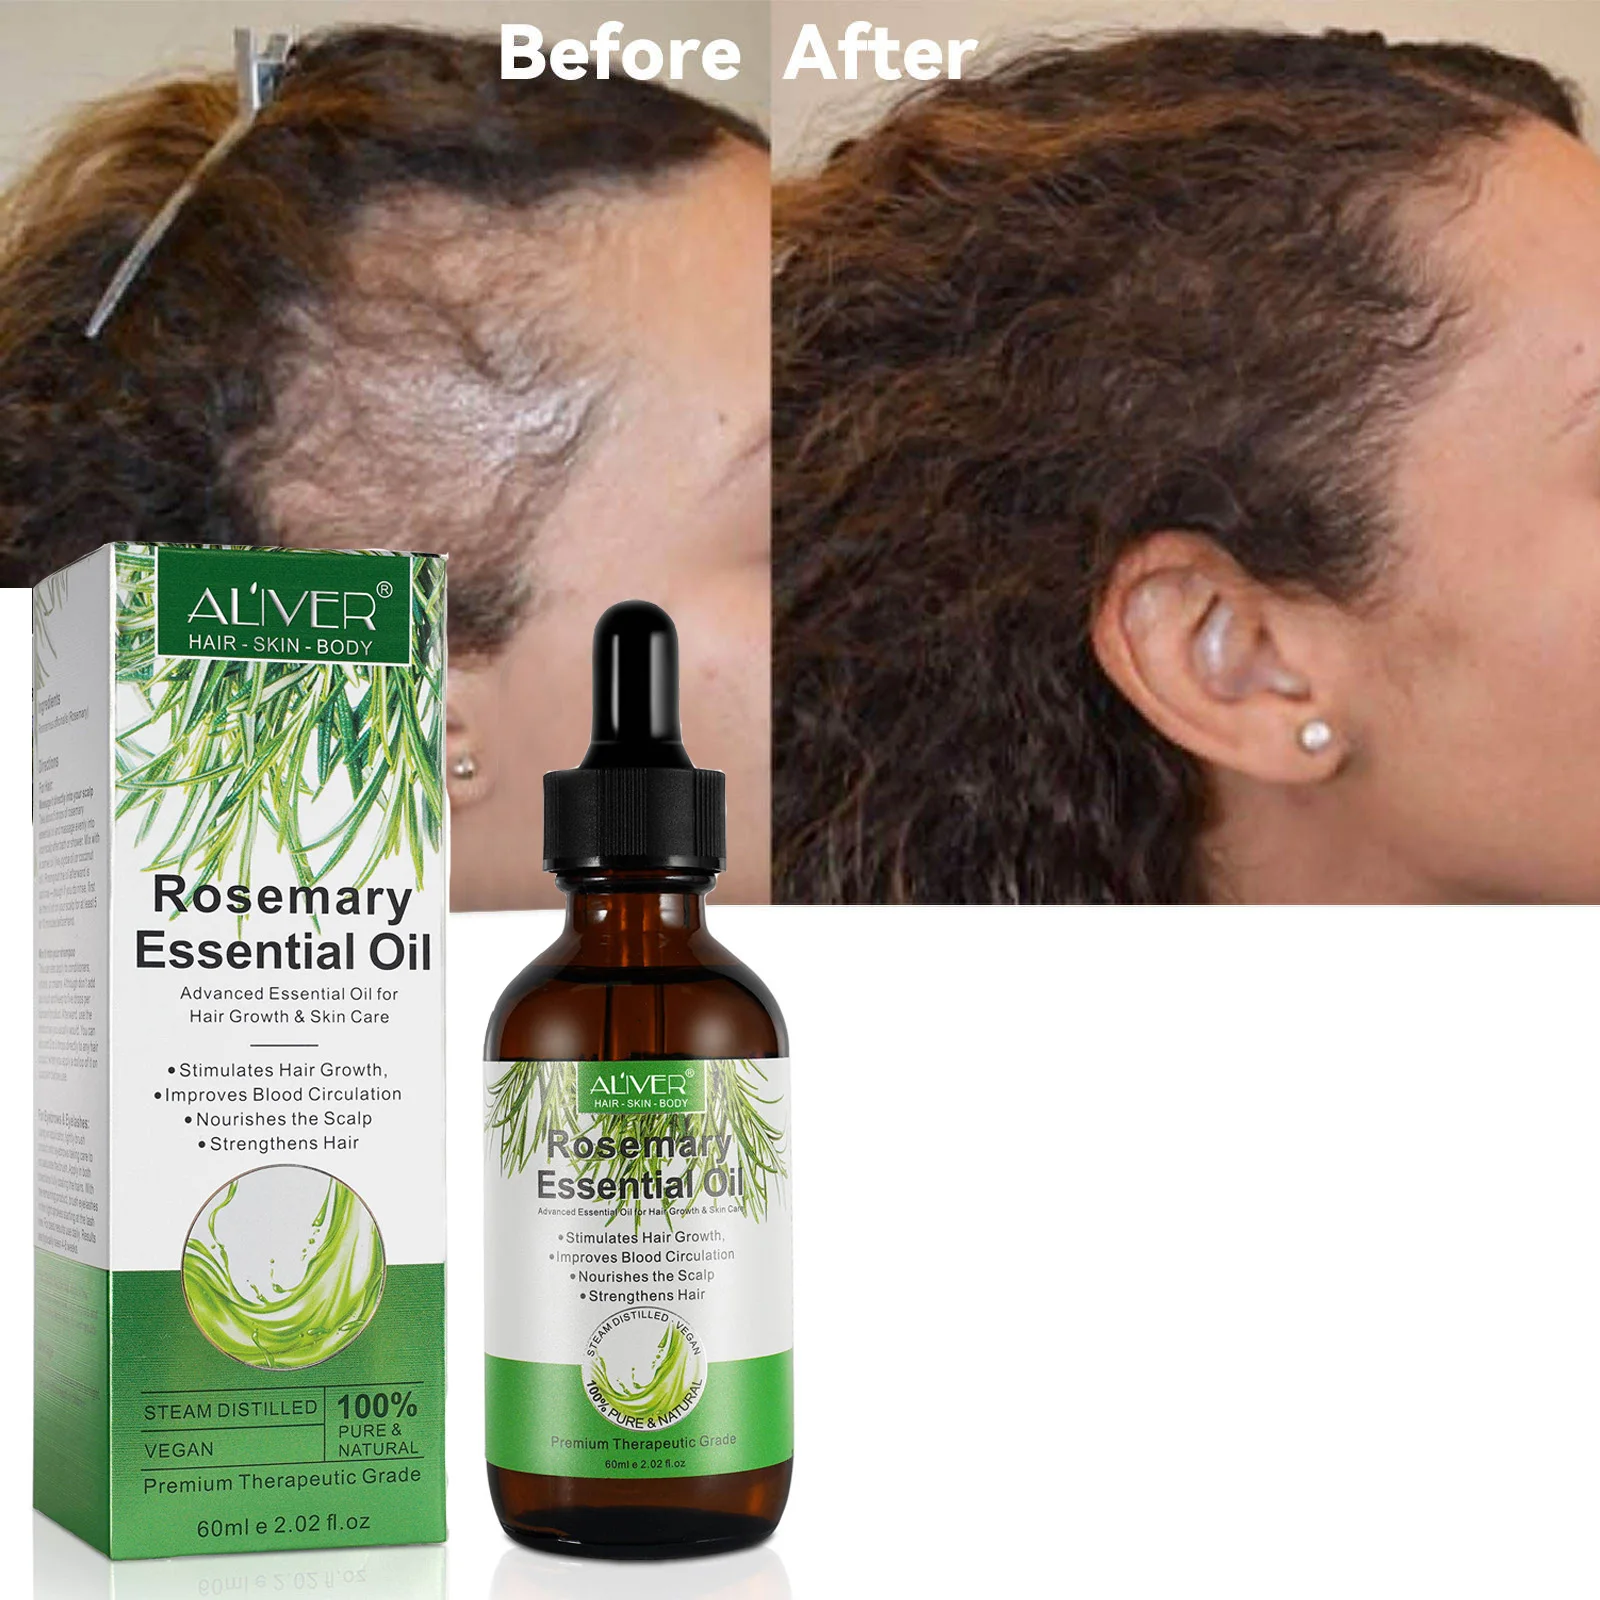 

ALIVER Scalp Care Hair-Repairing Nourishing Wholesale 100% Pure Natural Organic Rosemary Essential Oil for Hair Growth